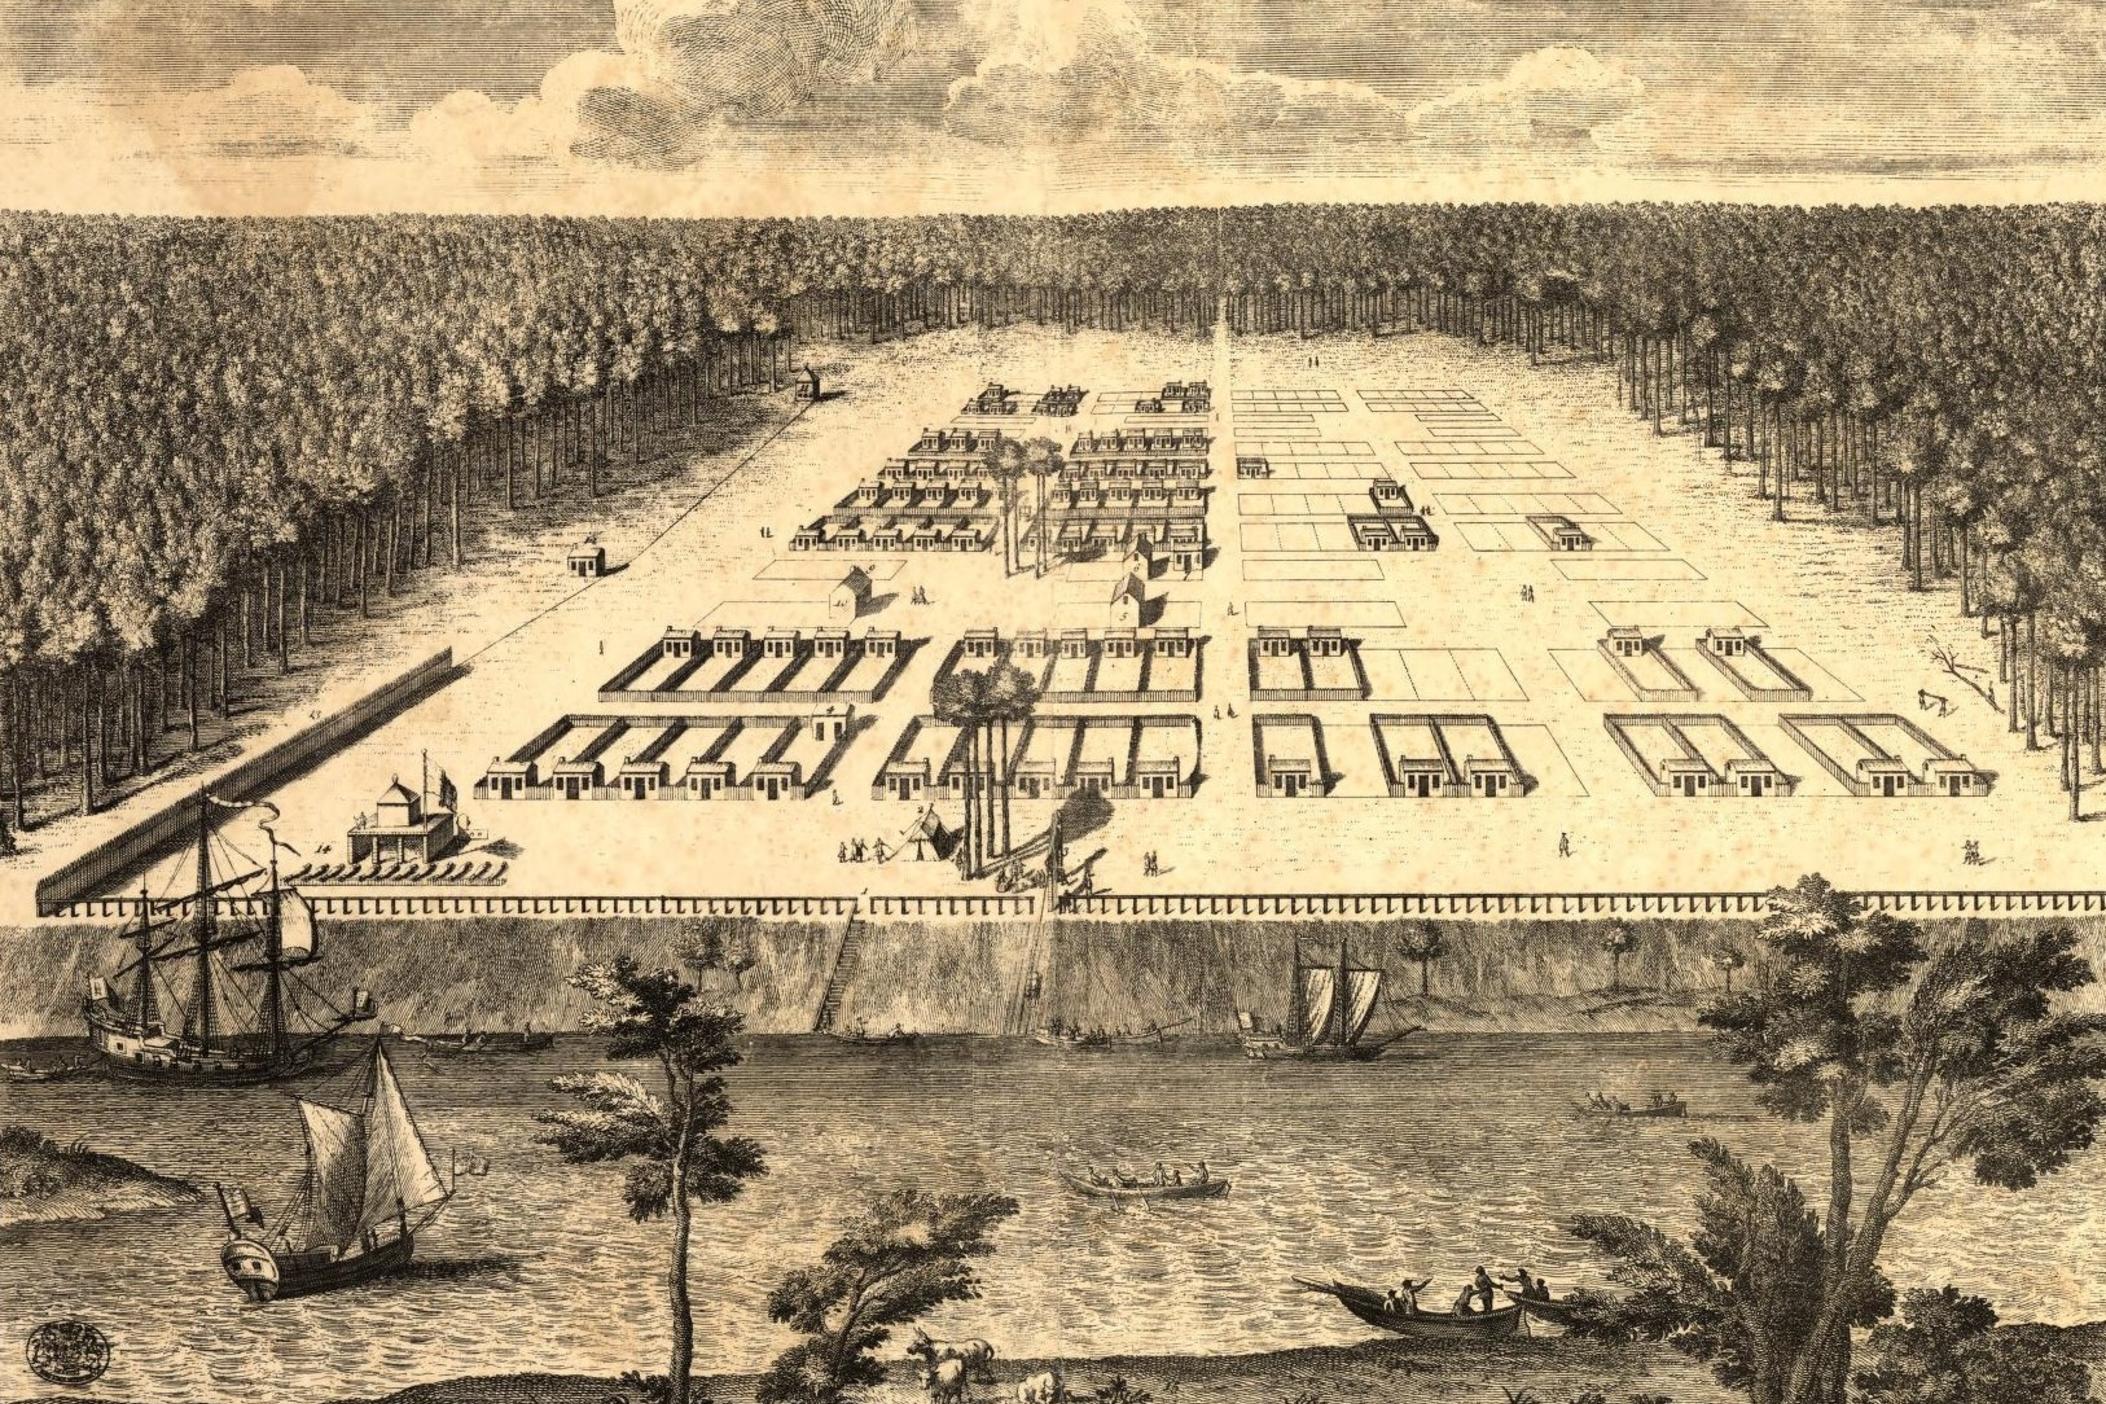 Savannah's historic town squares date back to the city's founding in 1733, when British colonist James Oglethorpe laid out the first four: Johnson, Ellis, Wright (then Perceval) and Telfair (then St. James). This 1734 drawing by draftsman Peter Gordon gives a bird's-eye view of the burgeoning city, looking south from across the Savannah River. The now-nameless square formerly known as Calhoun Square was added in 1851.